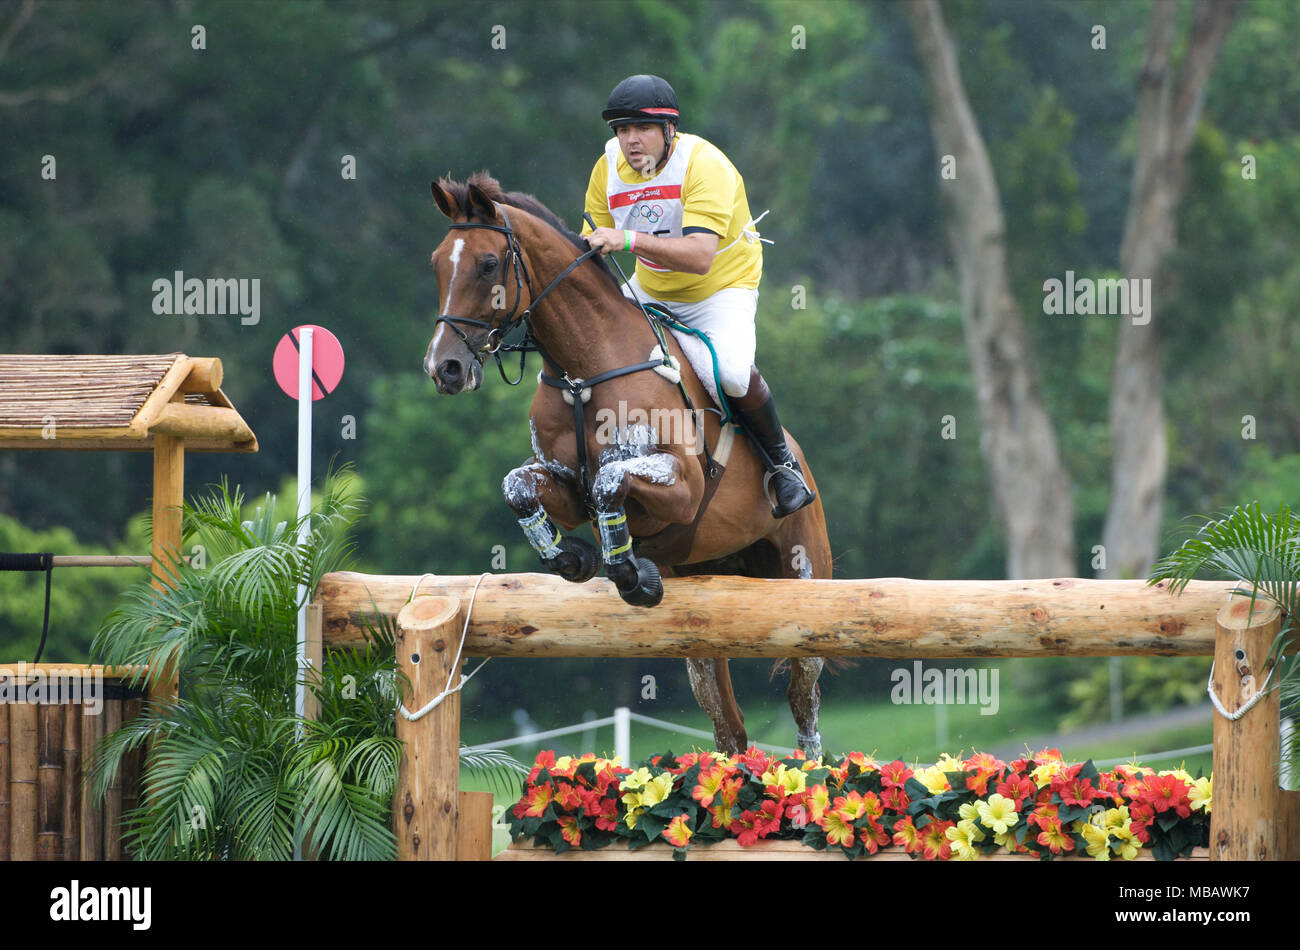 Olympic Games 2008, Hong Kong (Beijing Games) August 2008, Andre Paro (BRA) riding Land Heir, eventing cross country Stock Photo